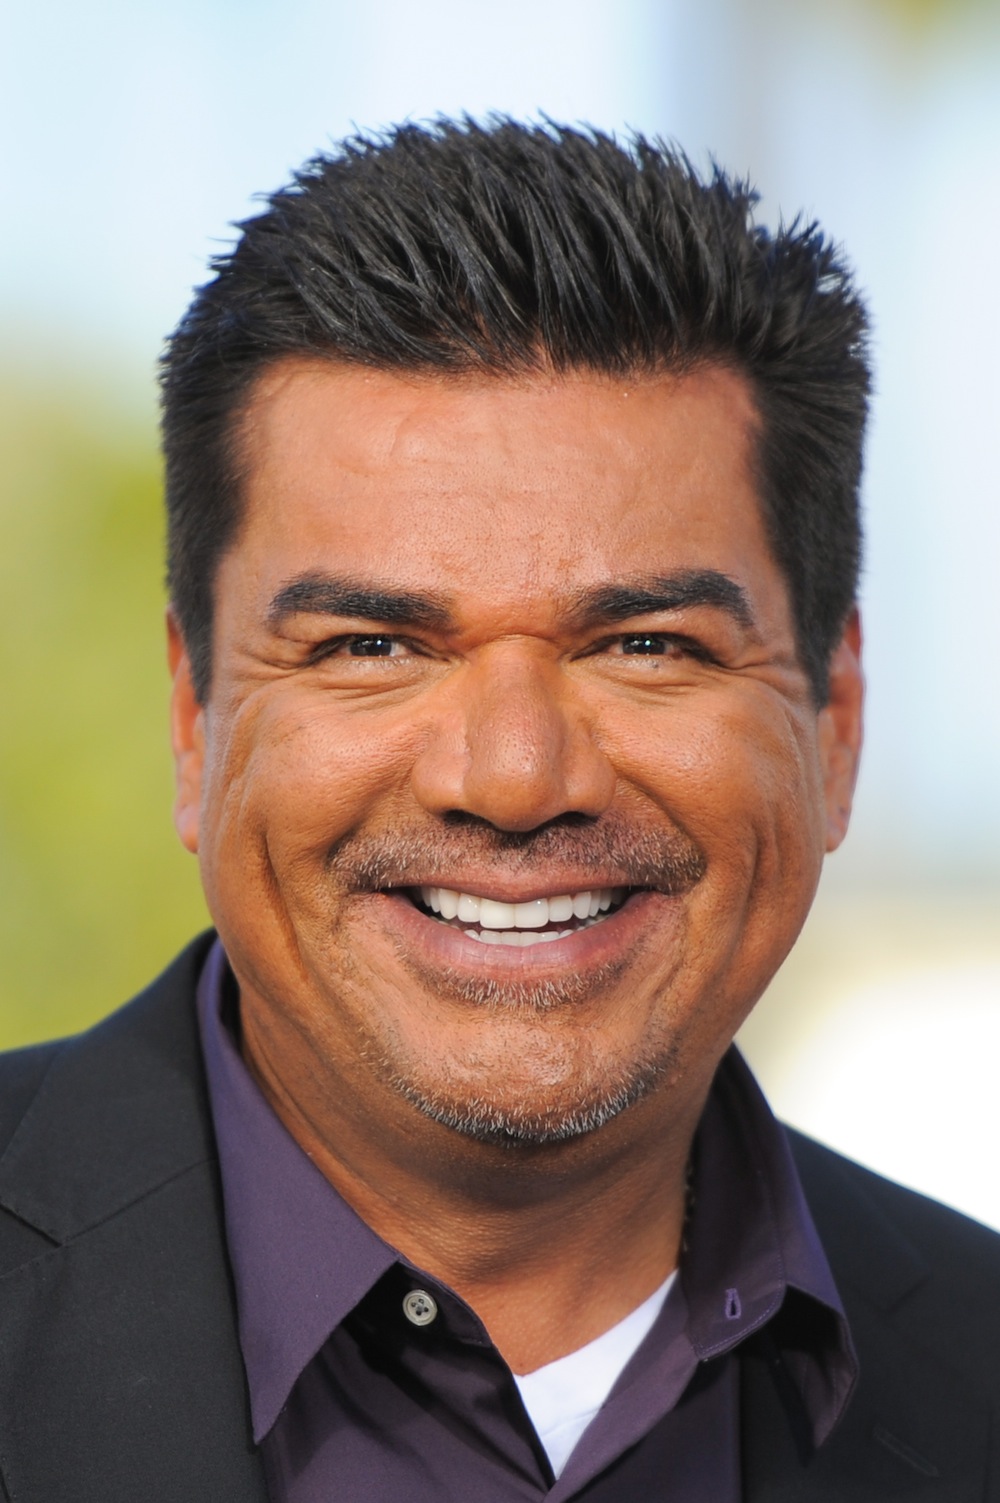 More Pictures Of George Lopez. 